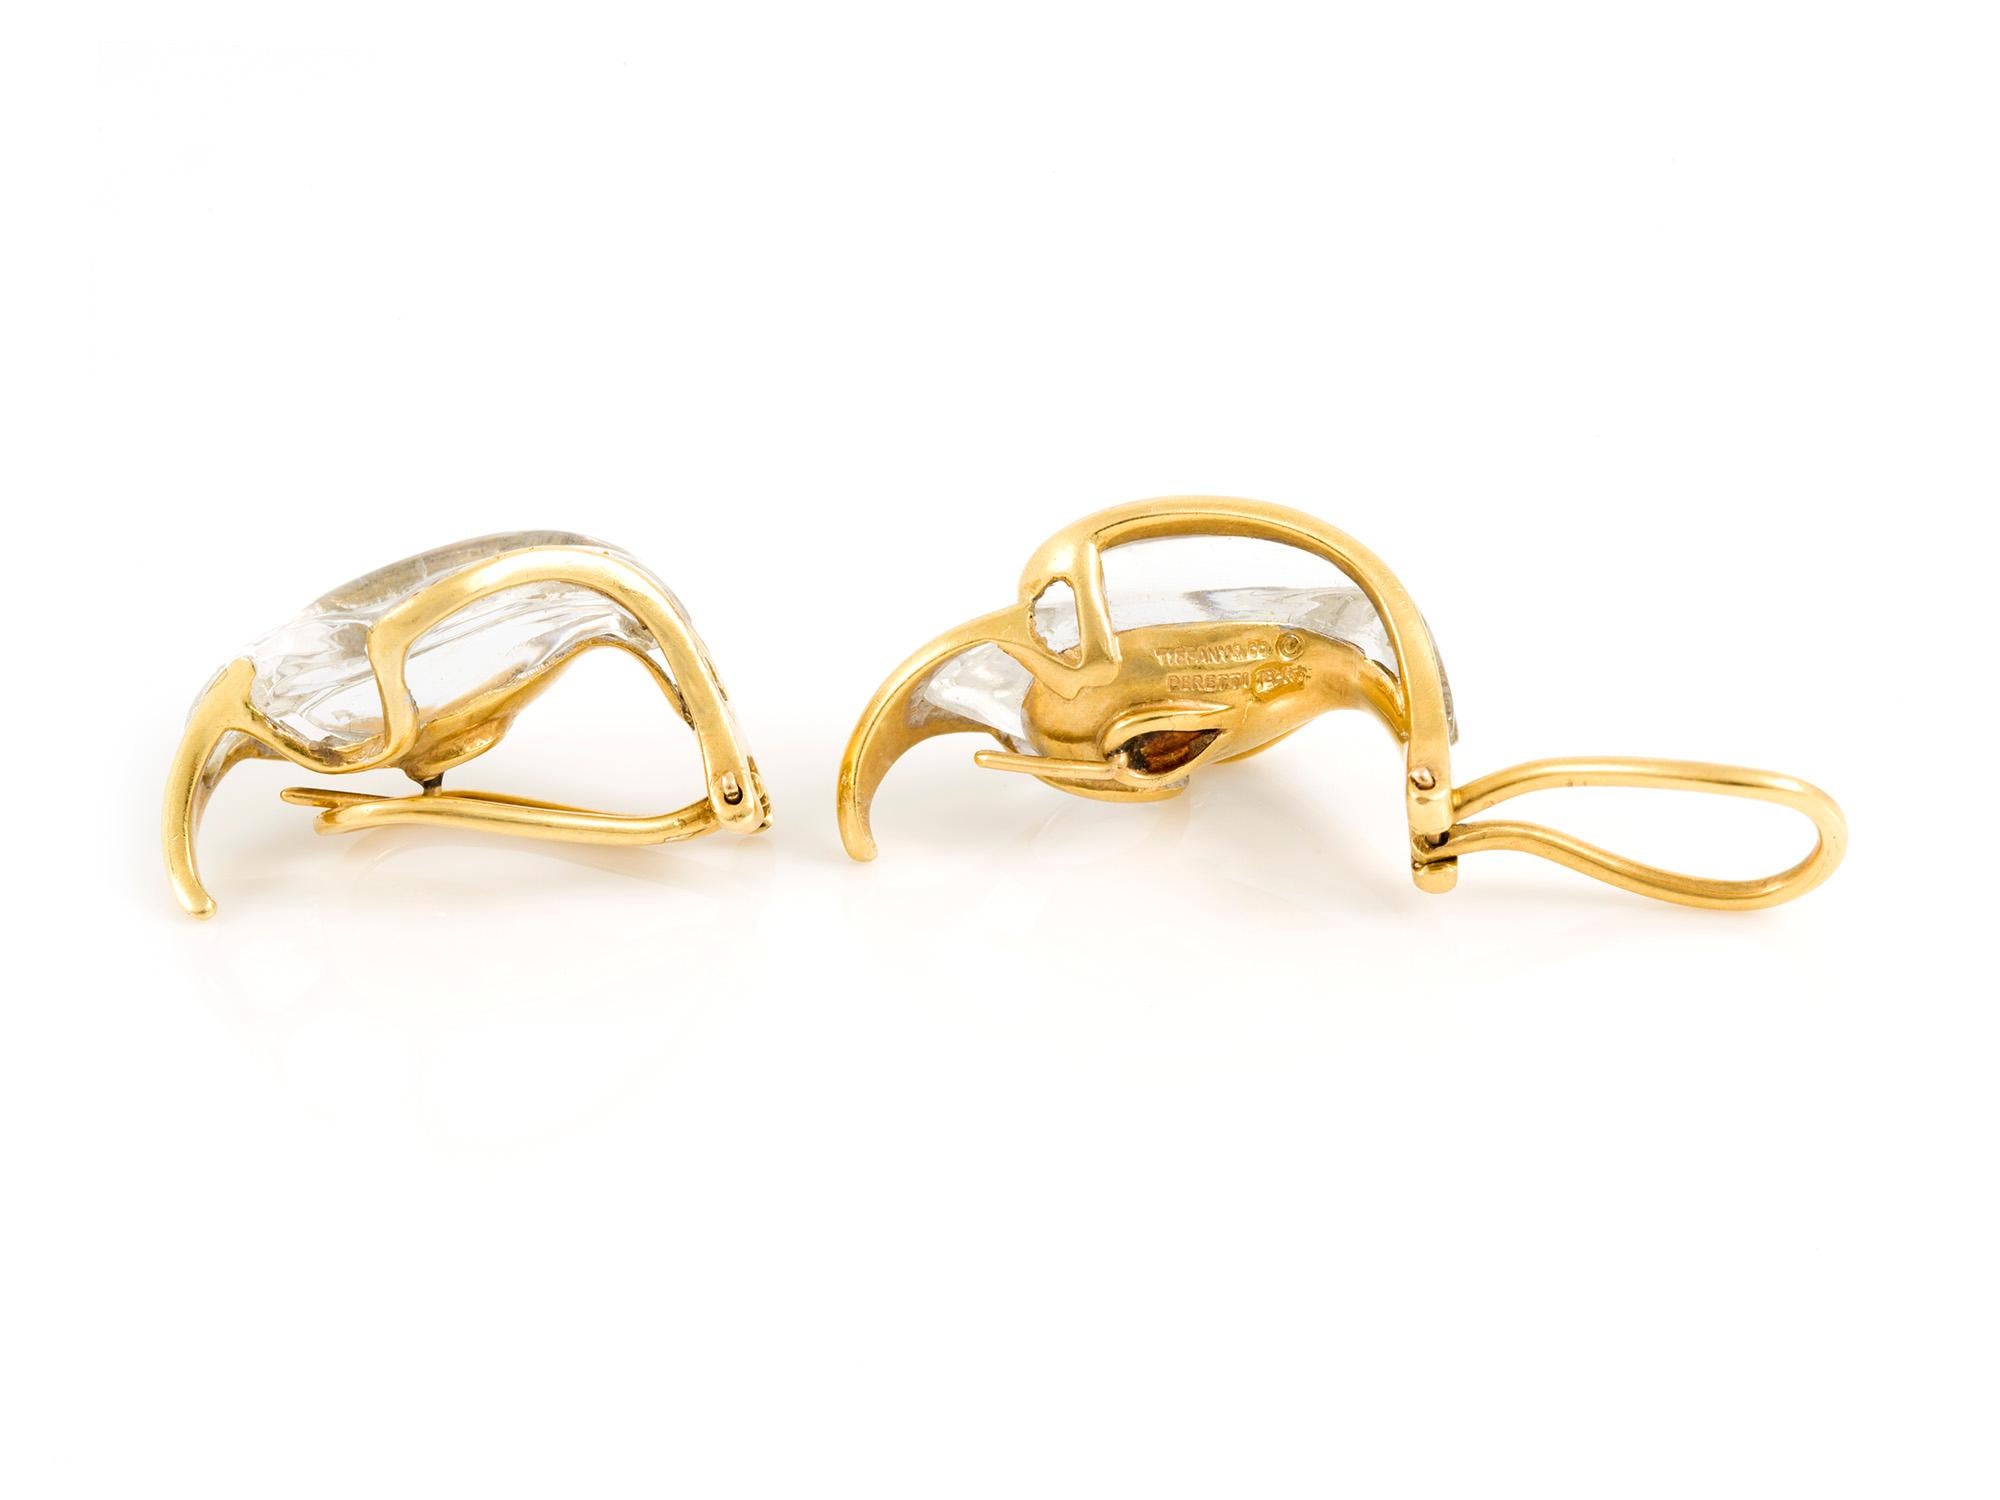 The earrings finely crafted in 18k yellow gold with beautiful cut of crystal .

Signed by Tiffany & Co.